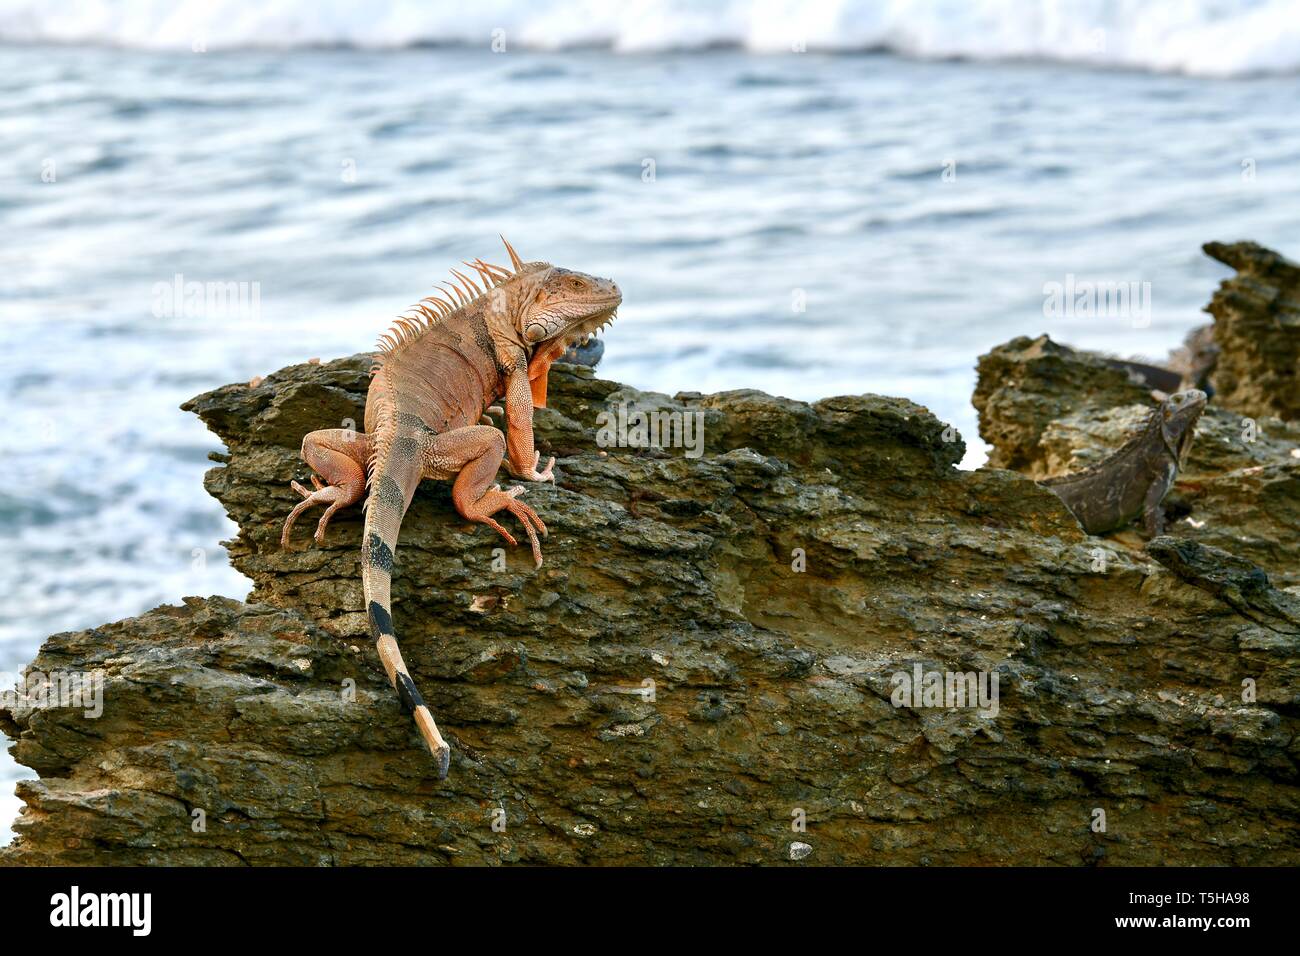 Iguana on a rocky shore in St. Croix, United States Virgin Islands Stock Photo